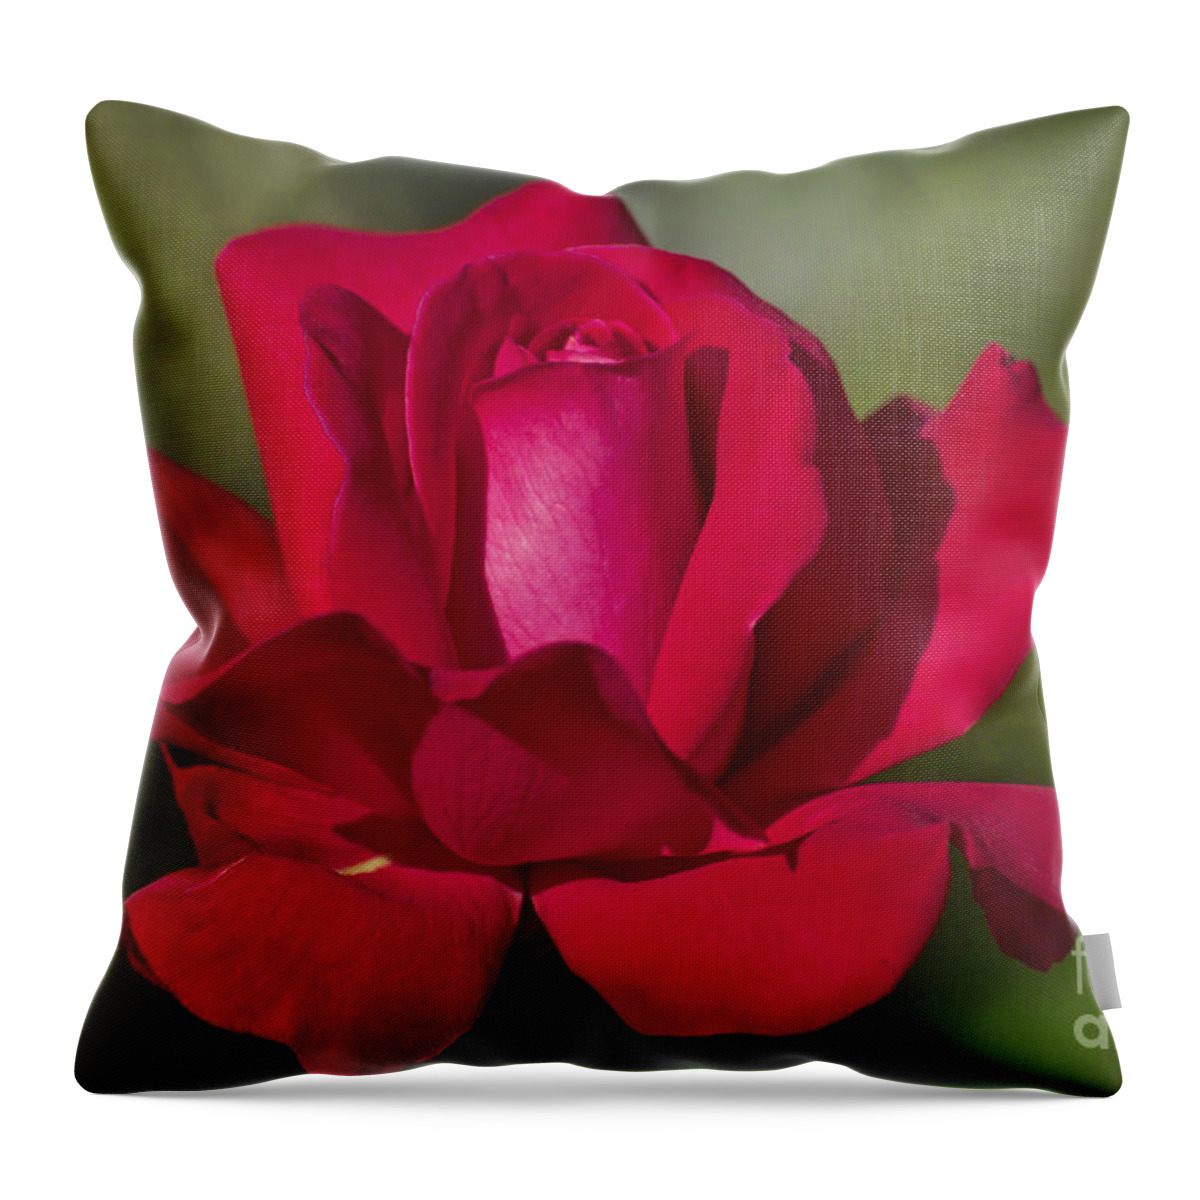 Rose Throw Pillow featuring the photograph Rose Flower Series 2 by Heiko Koehrer-Wagner